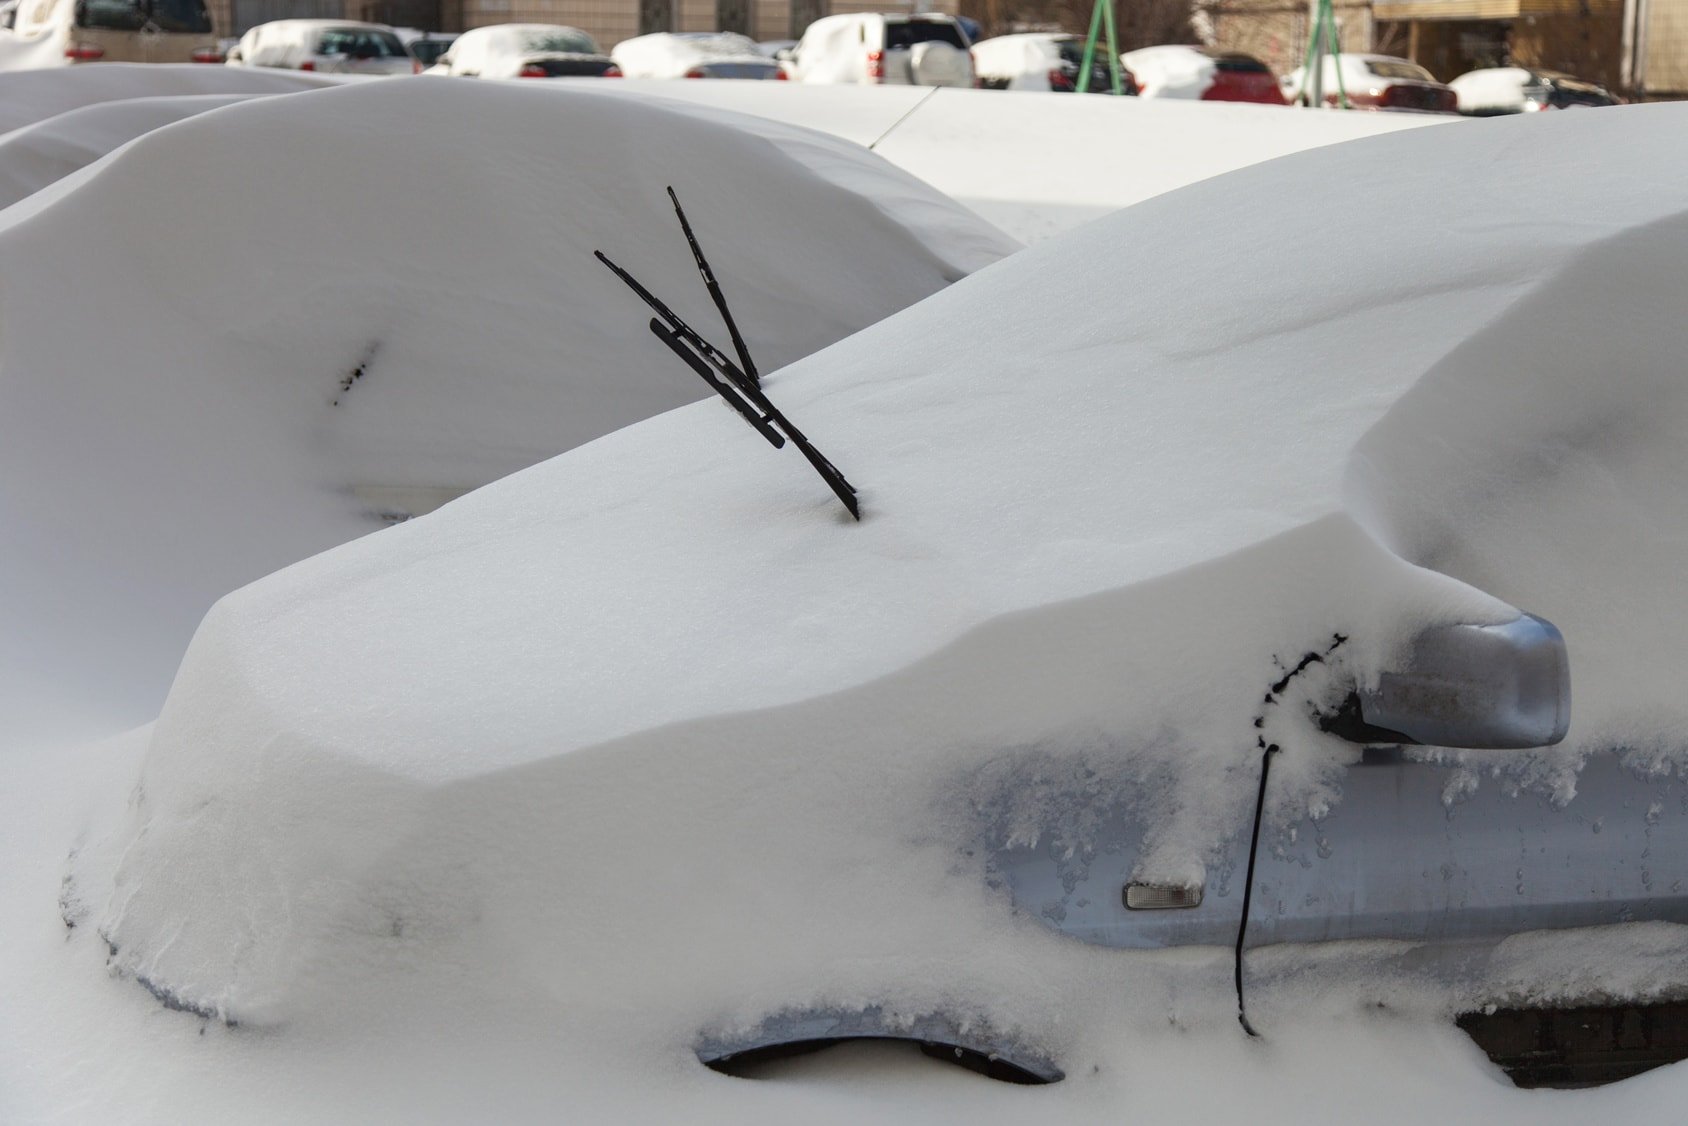 Winter windshield maintenance: How to protect your windshield this